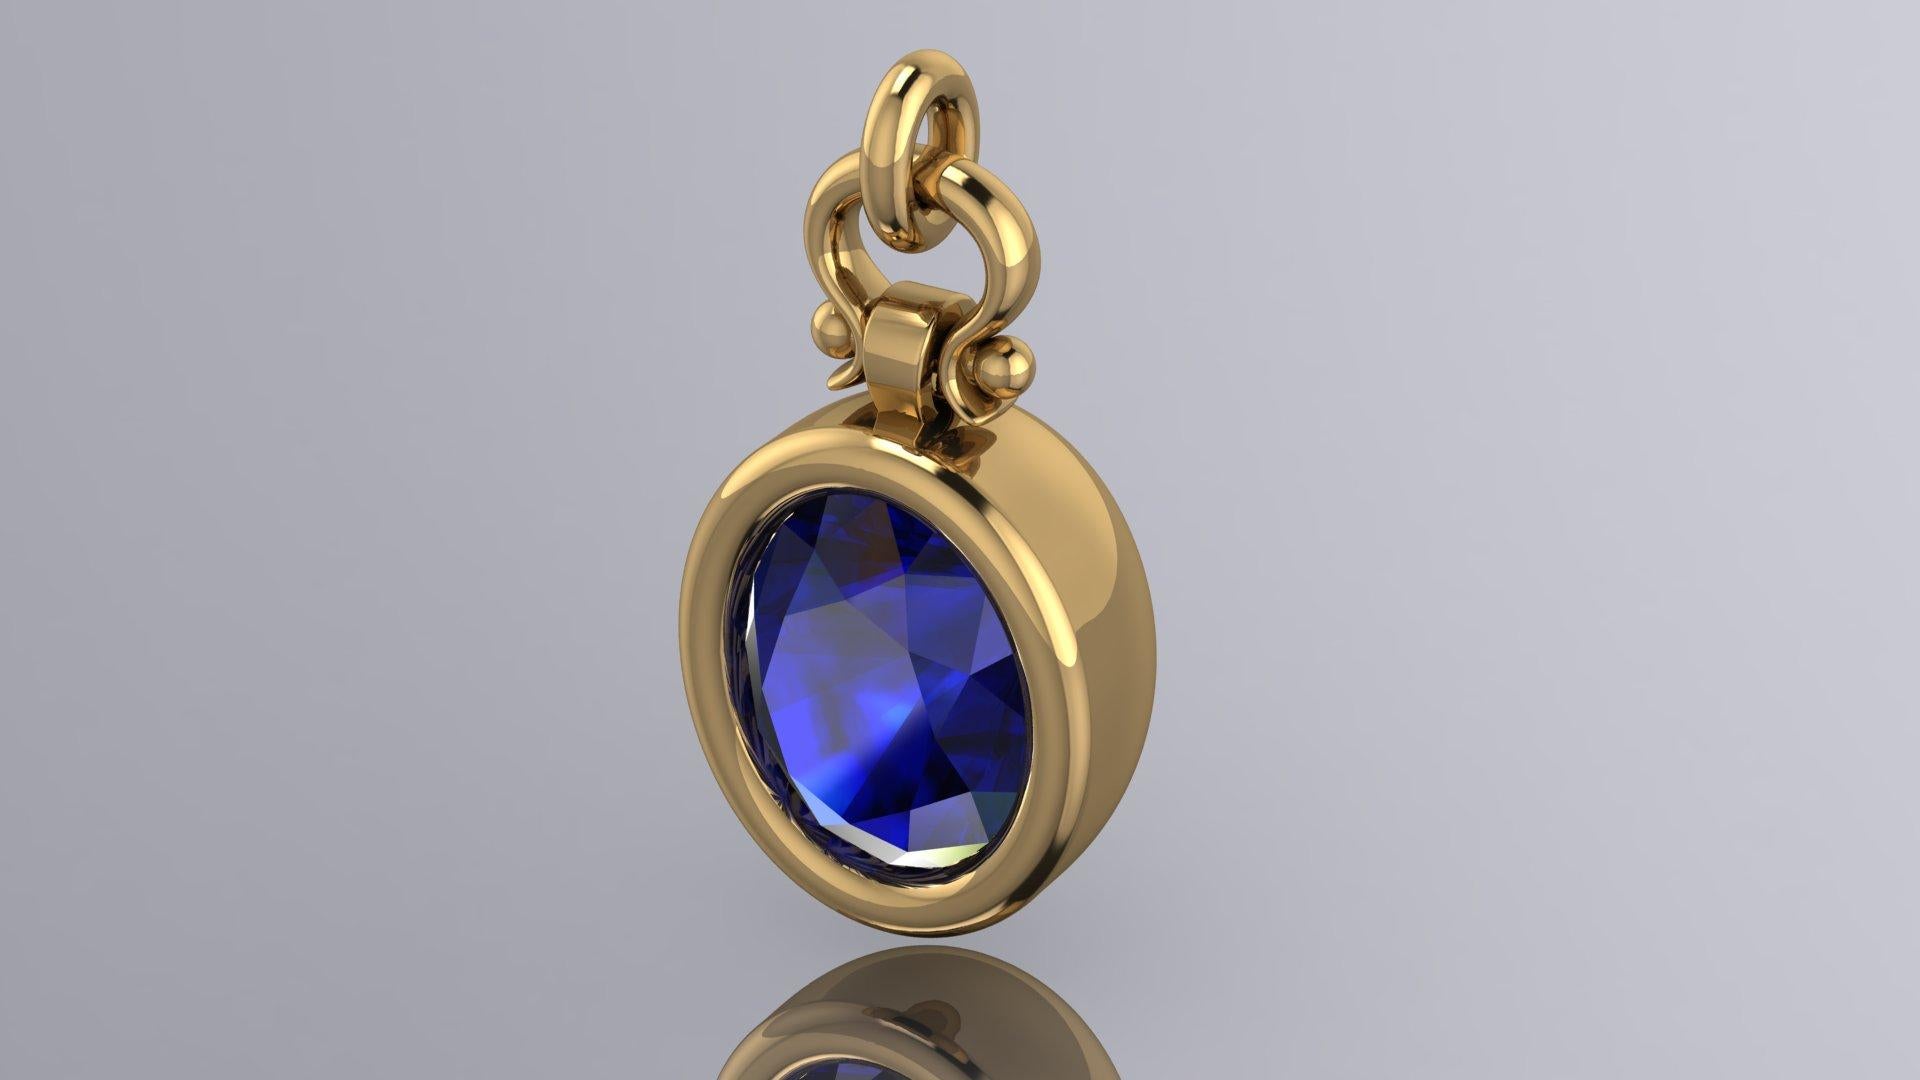 Berberyn Certified 3.89 Carat Oval Blue Sapphire Custom Pendant Necklace in 18k In New Condition For Sale In Chicago, IL